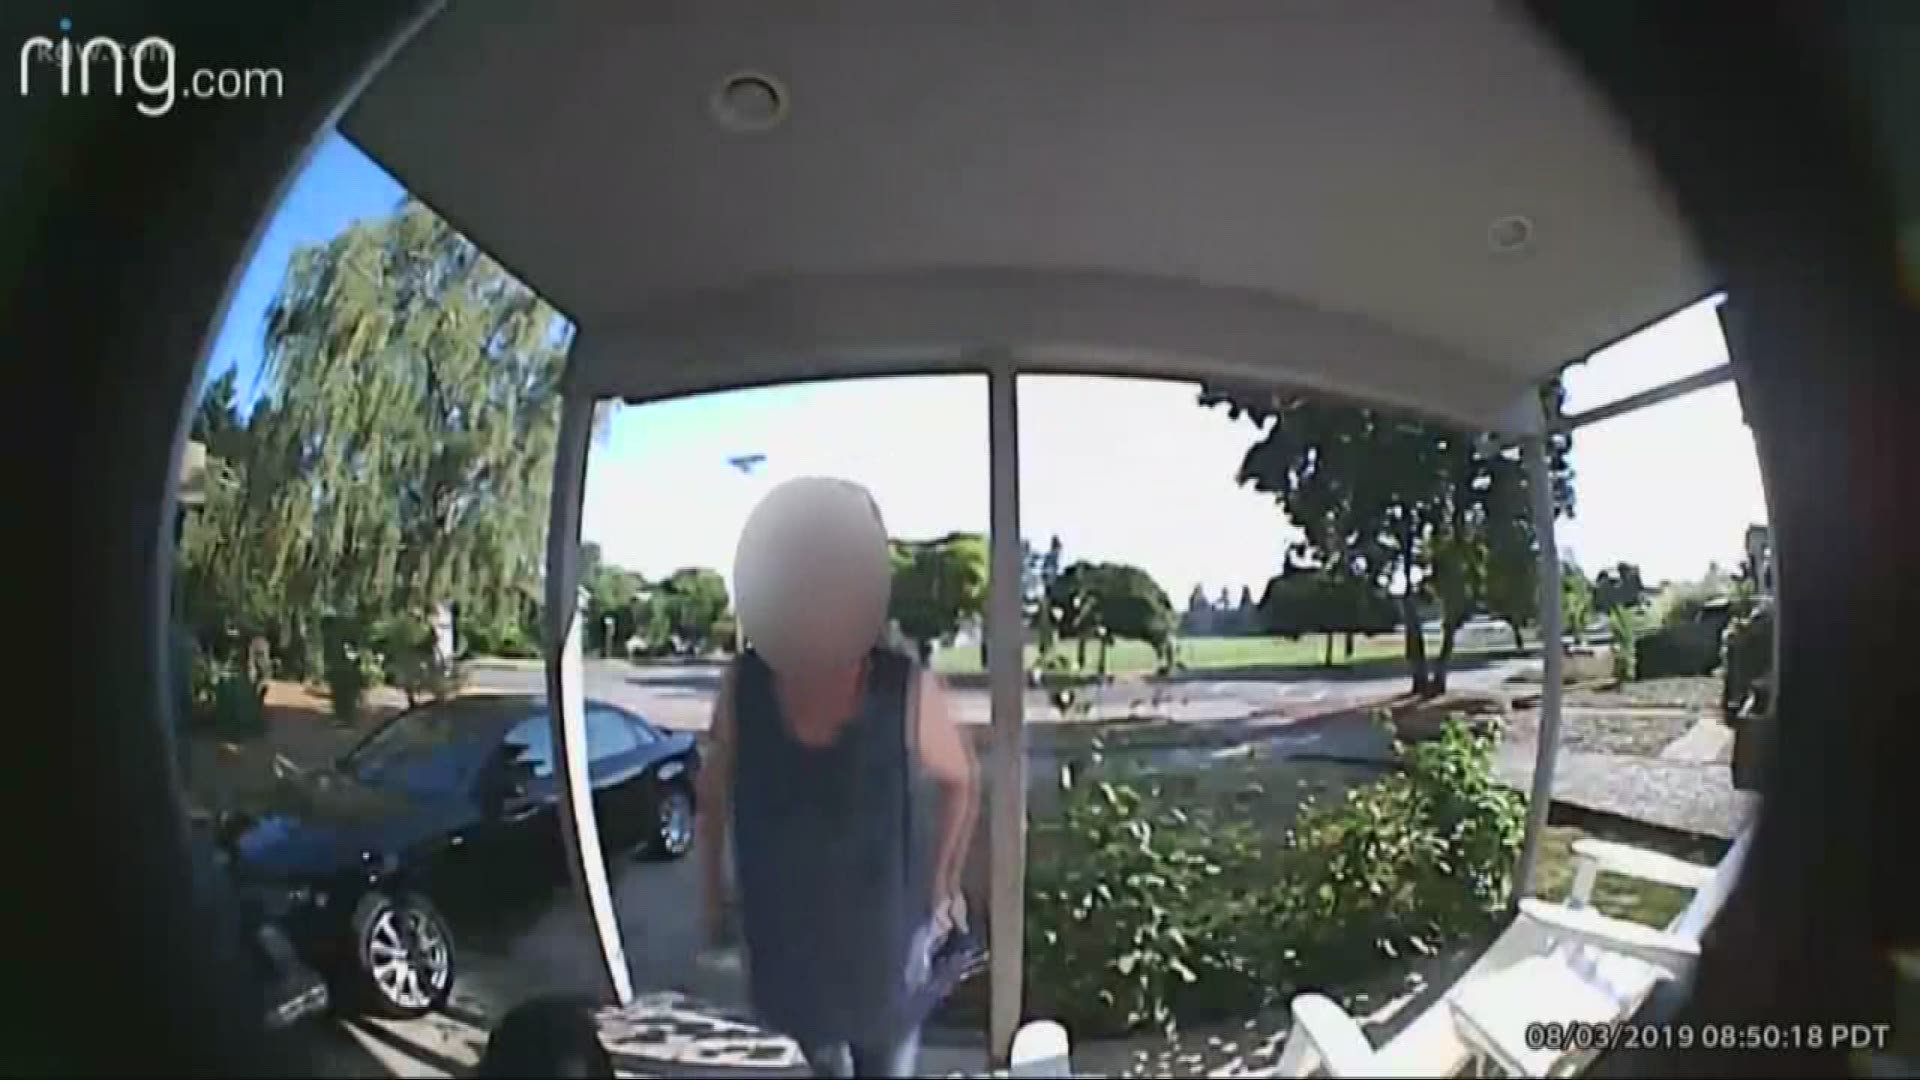 Video shows a woman dumping dog feces into a stranger’s mailbox in St. Johns.